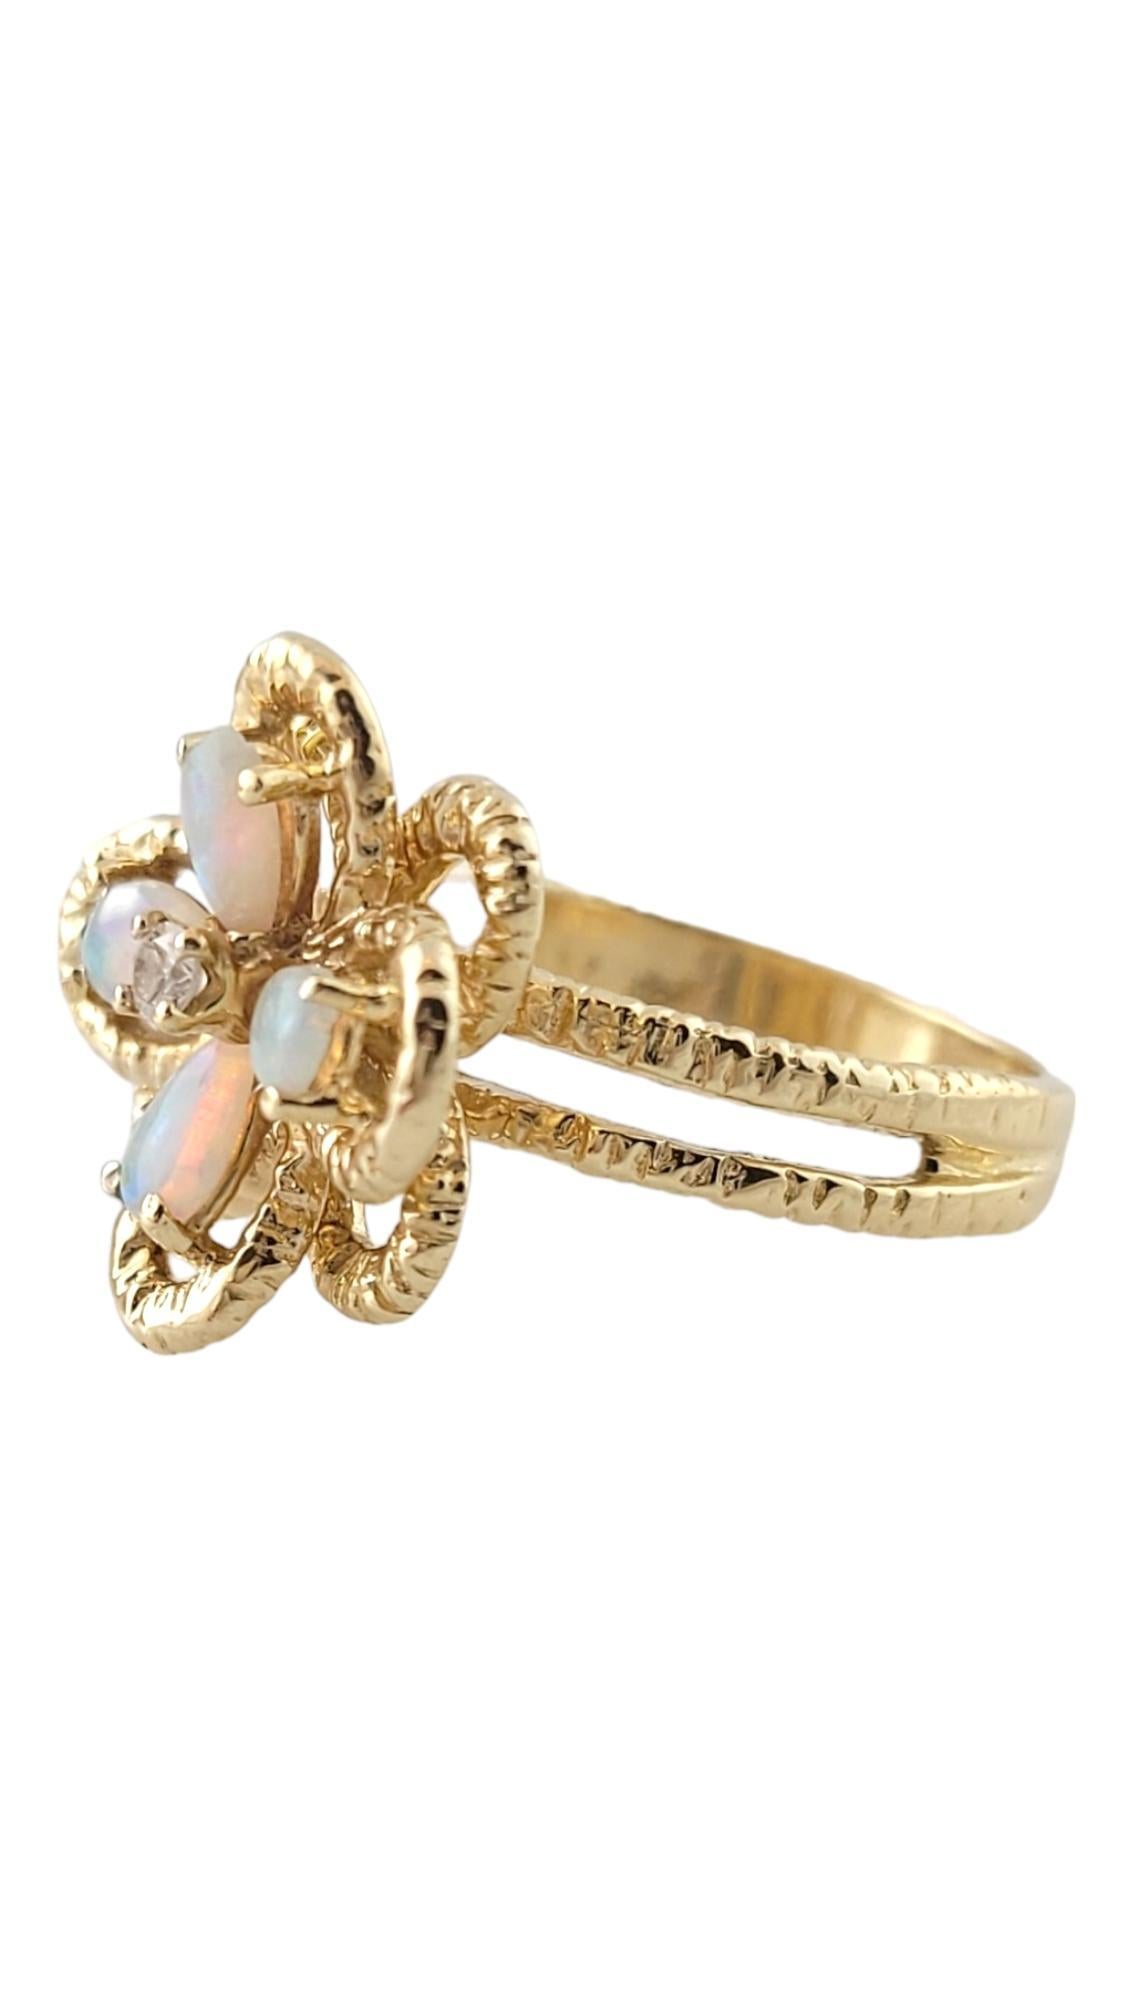 Vintage 14K Yellow Gold Opal and Diamond Ring Size 6.5

This beautiful ring has a gorgeous 14K yellow gold flower decorated with opal pedals and a round brilliant cut diamond center!

Approximate total diamond weight: .02 cts

Diamond color: